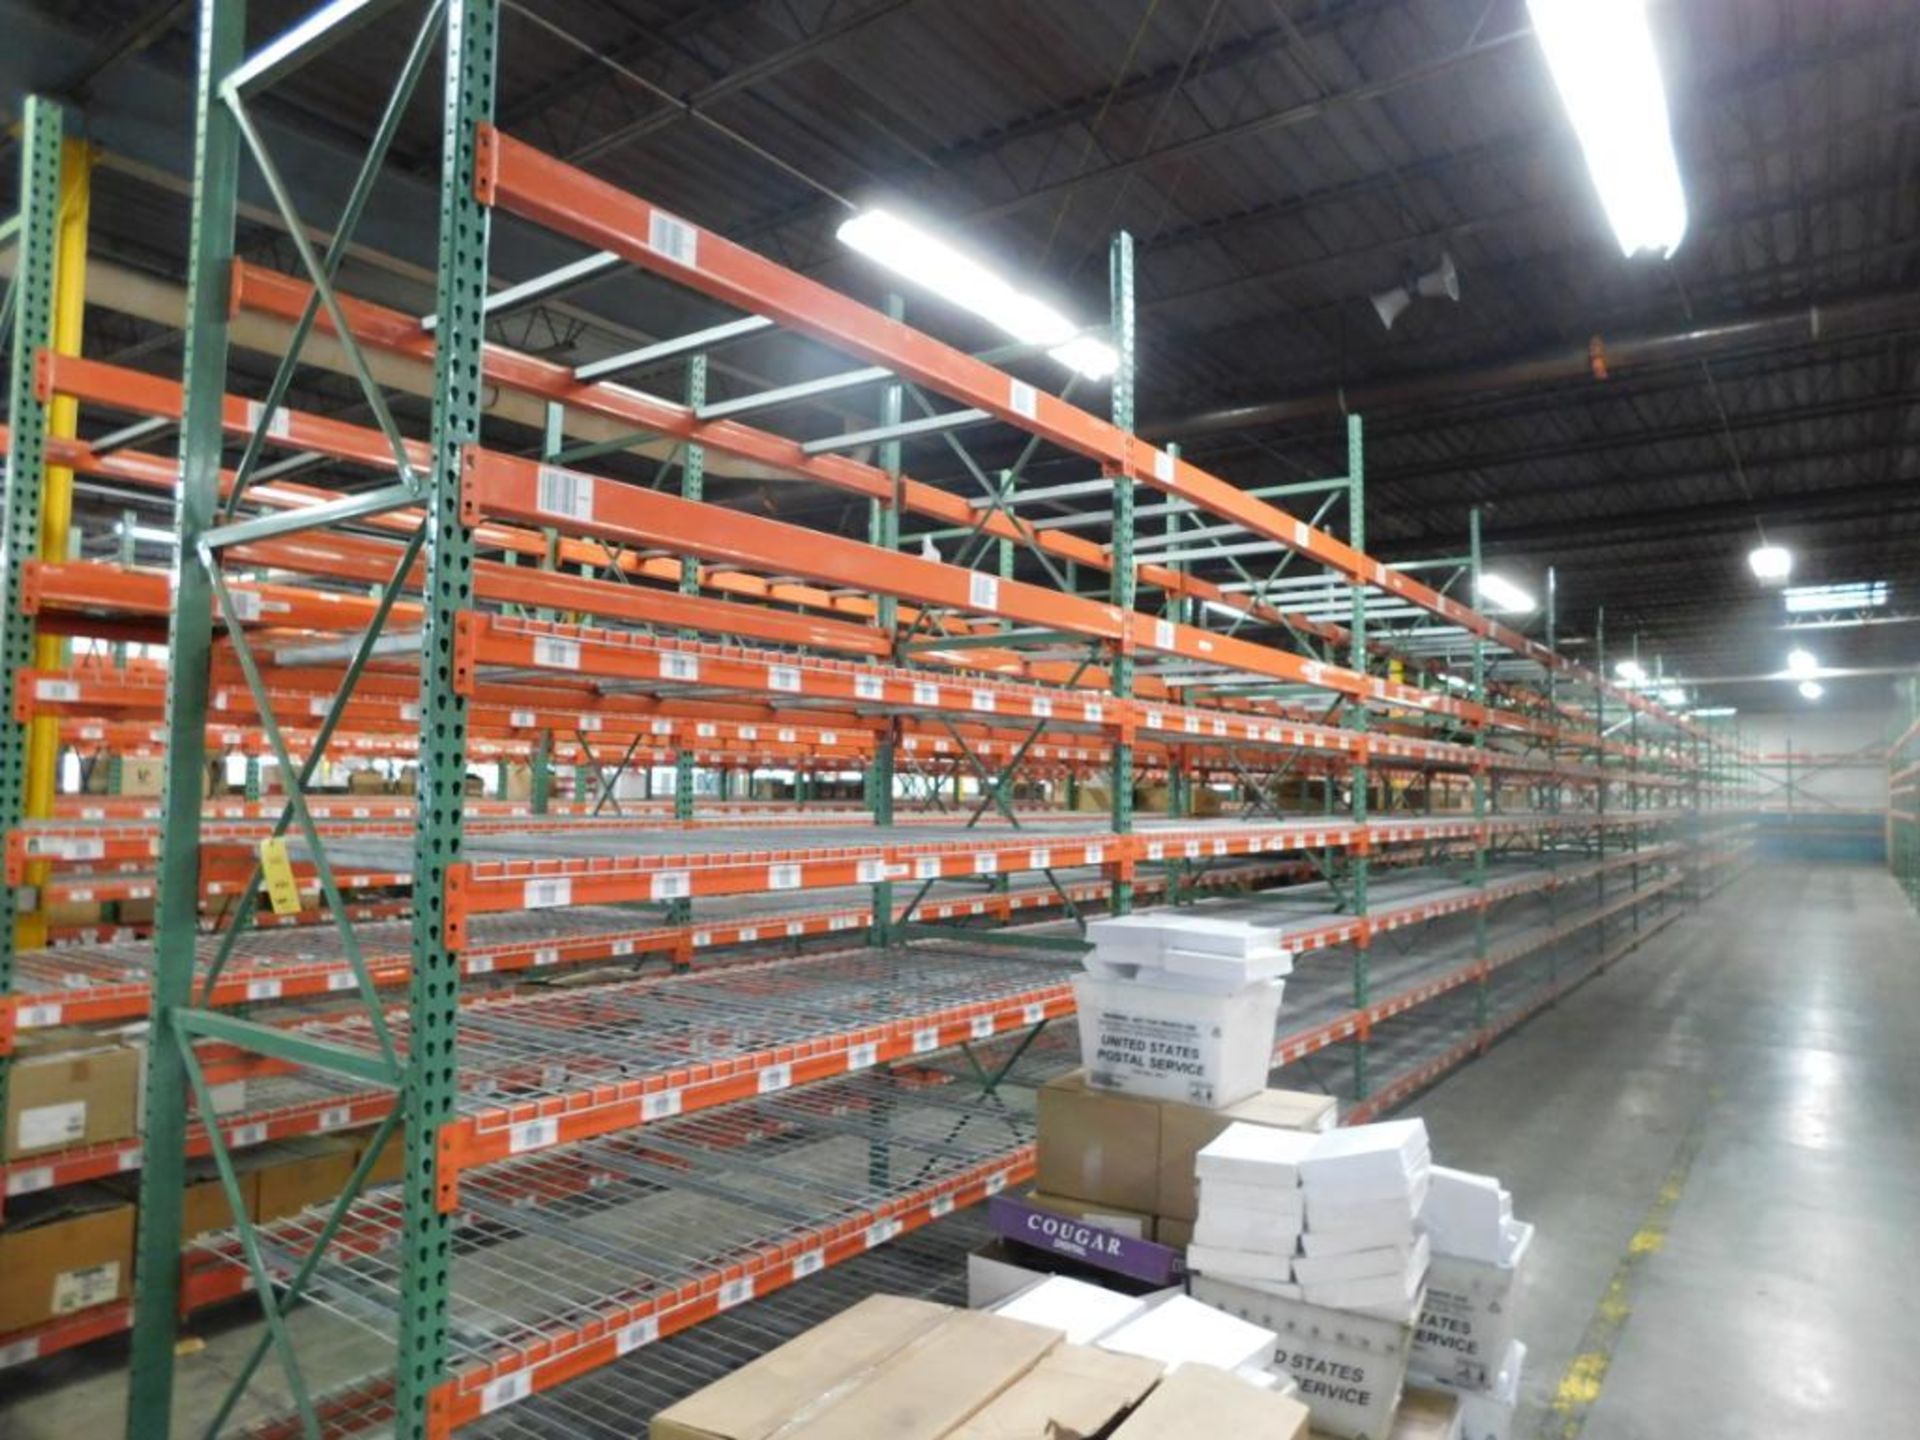 LOT: (16) Sections Multi-Tier Pallet Rack, 8 ft. Wide x 12 ft. High x 42 in. Deep, Most with Wire De